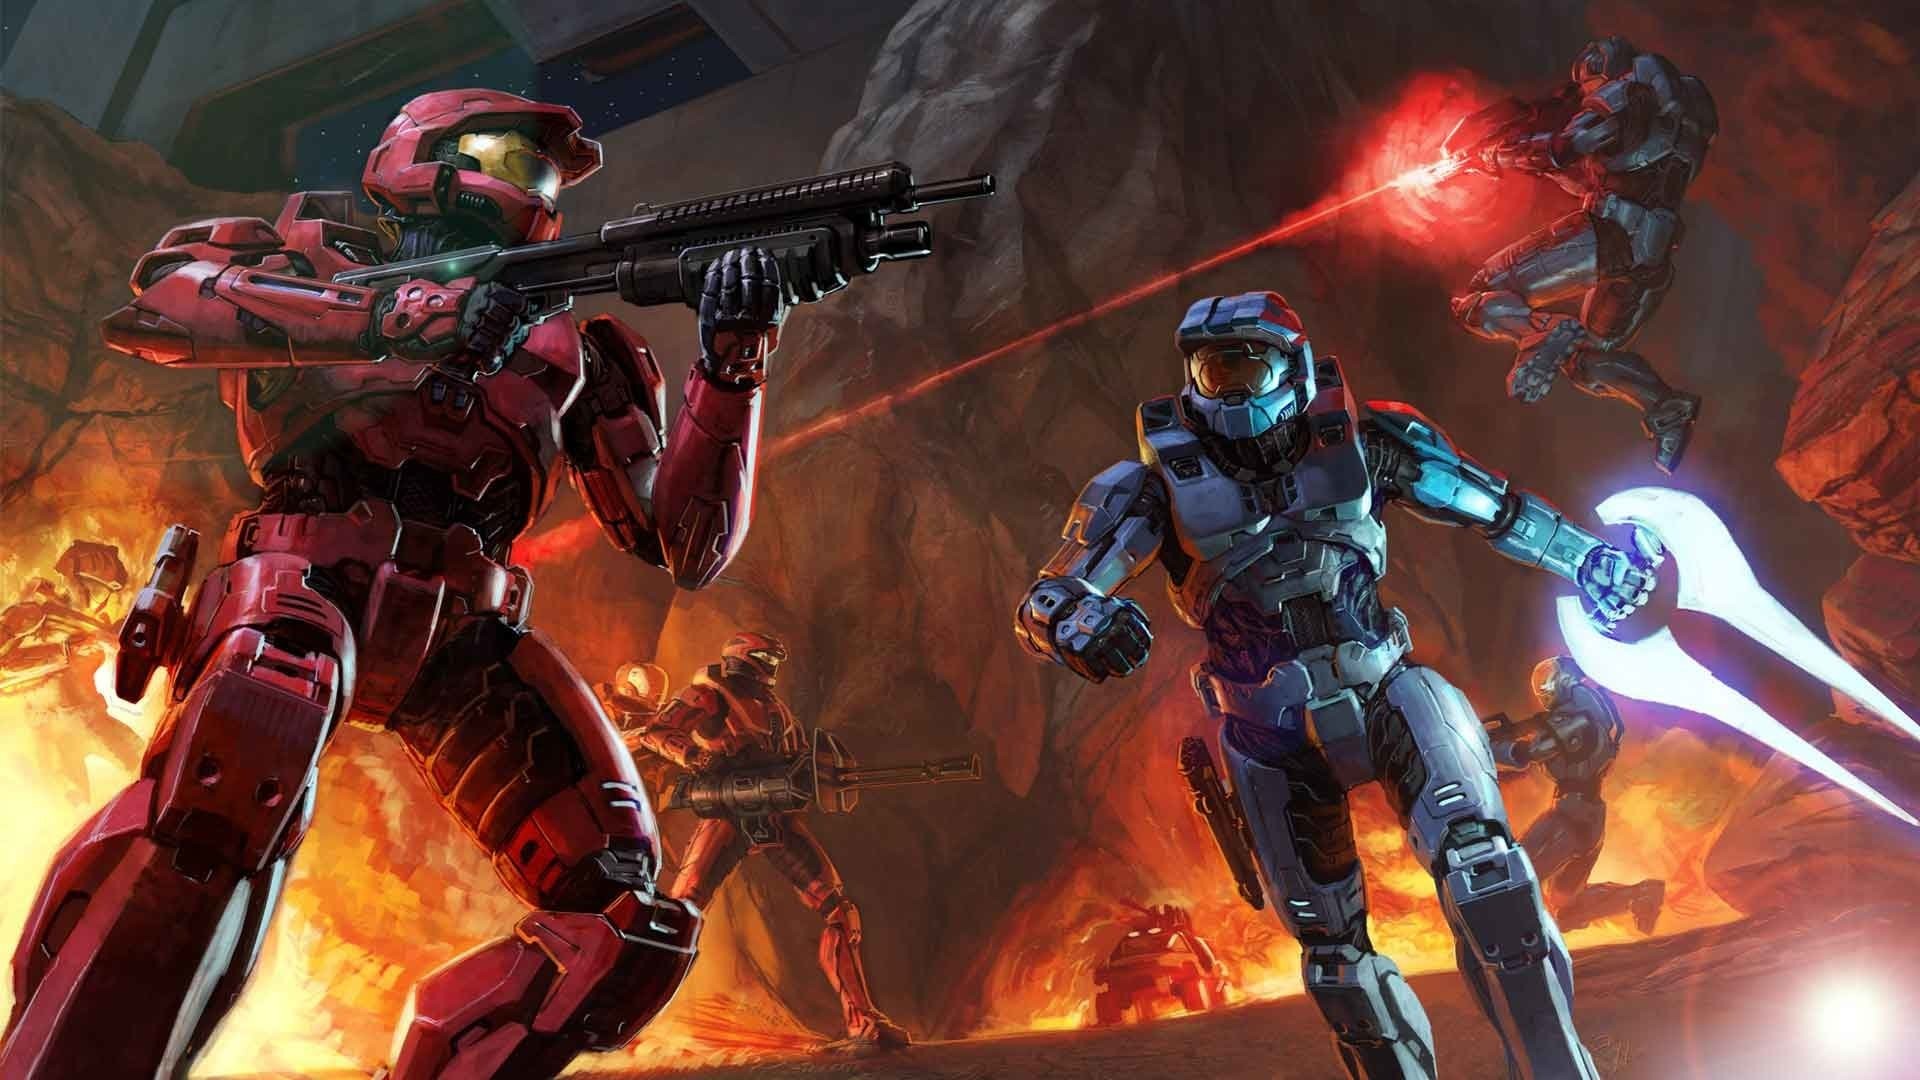 1920x1080 Video Game - Halo 2 Space Battle Wallpaper